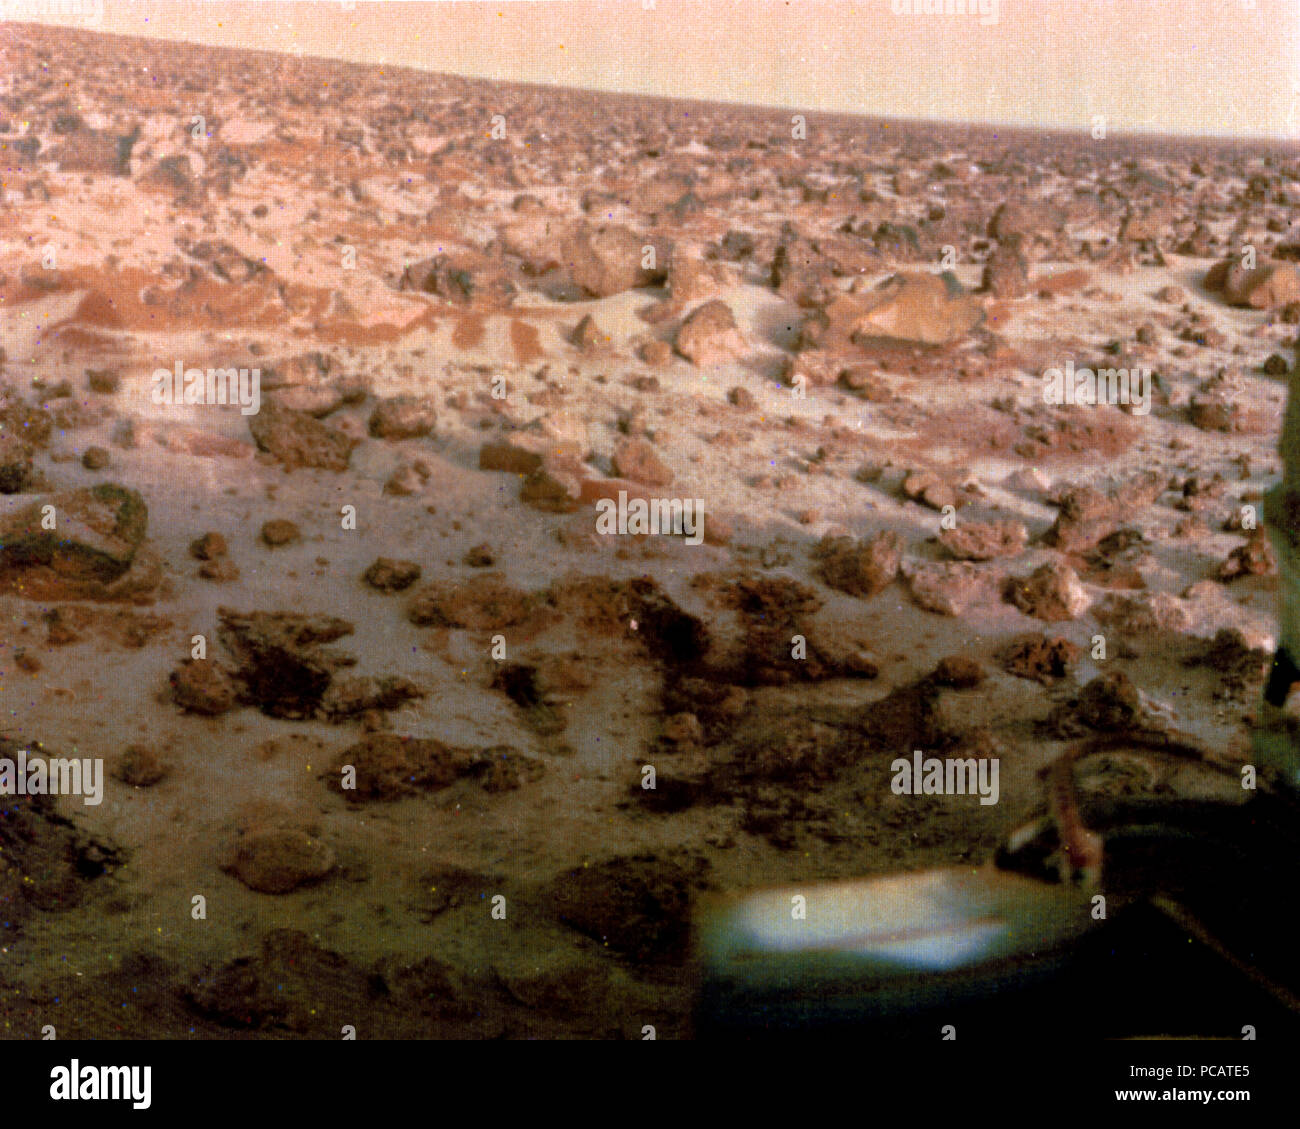 View of ice on Martian surface at Utopia Planitia, Landing Site of Viking 2. The Viking 2 Lander took this photo on May 18, 1979, and relayed it to Earth via the Viking Orbiter 1 on June 07, 1979. Stock Photo